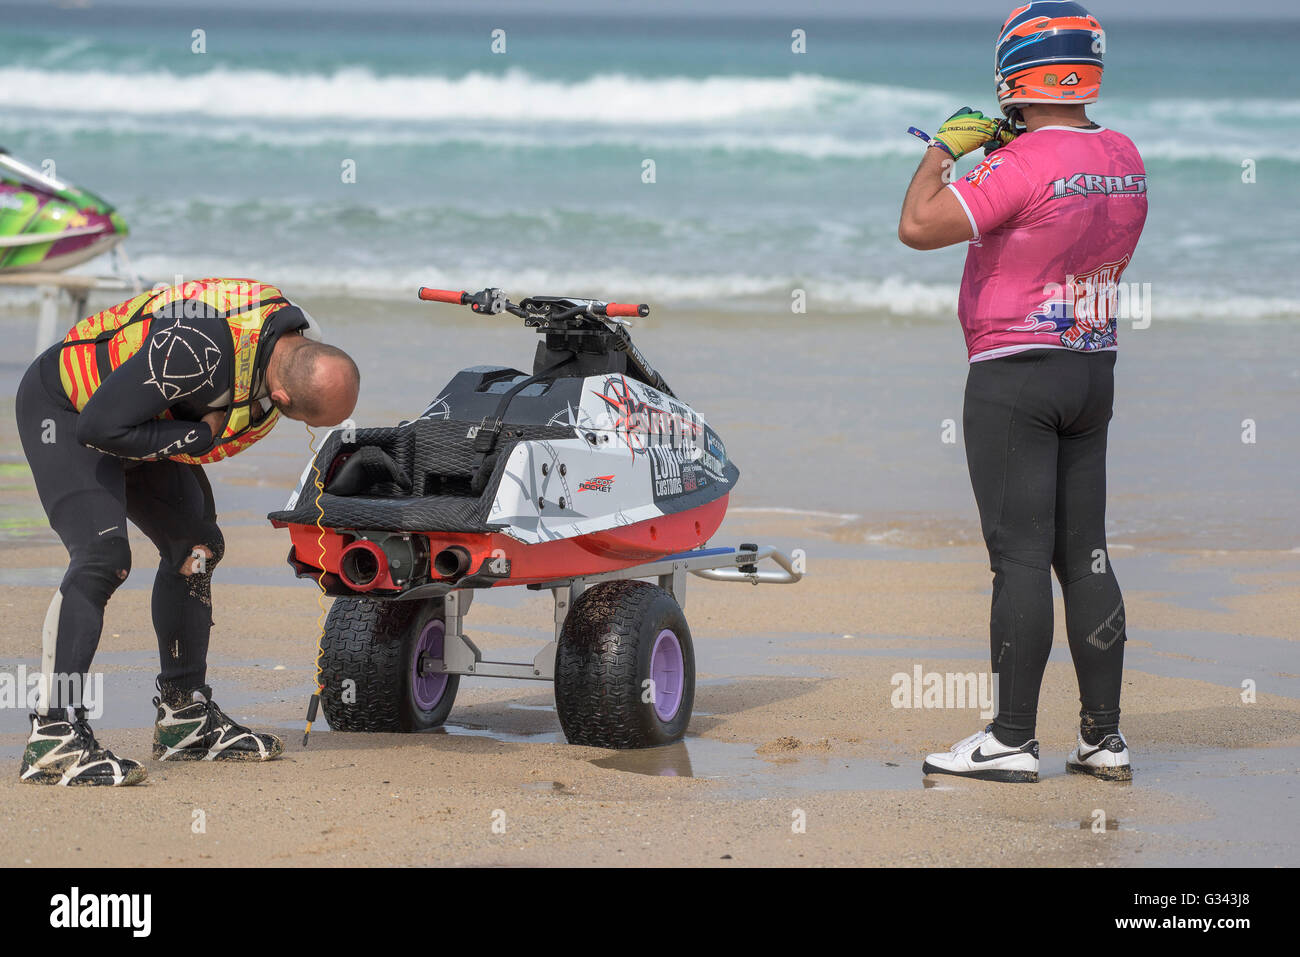 Competitors checking out a Jet-ski at the IFWA World Freeride Championships. Stock Photo